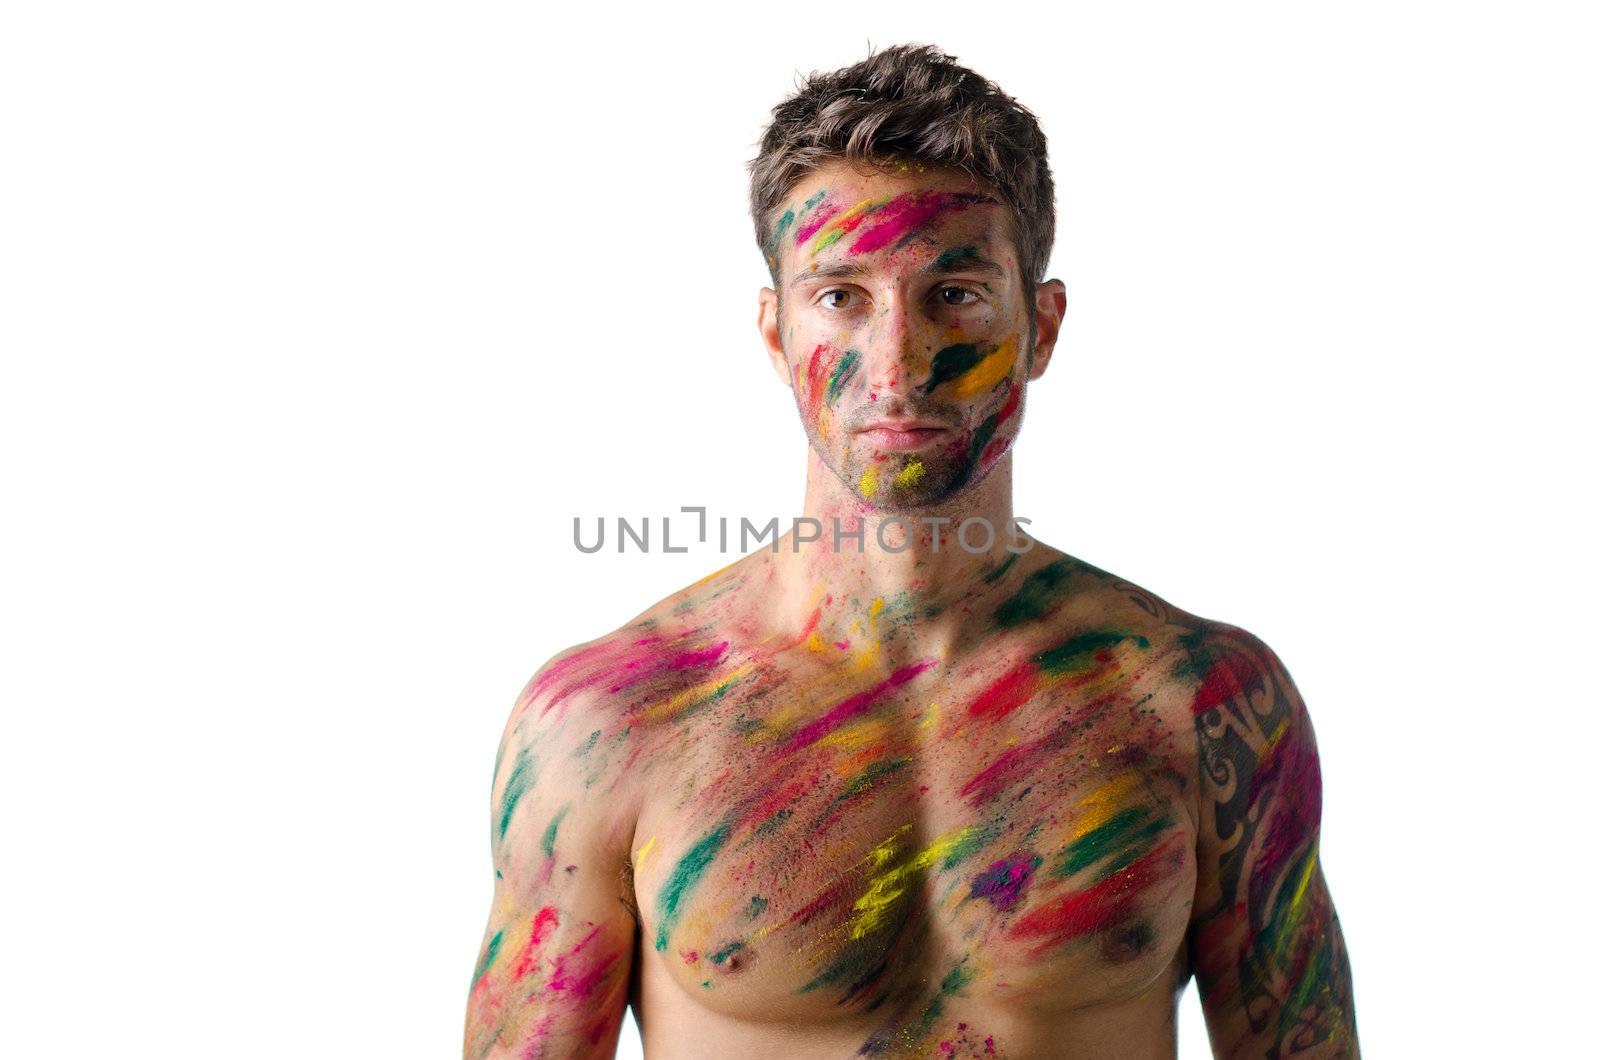 Attractive and athletic shirtless young man, skin painted all over with Holi colors, isolated on white